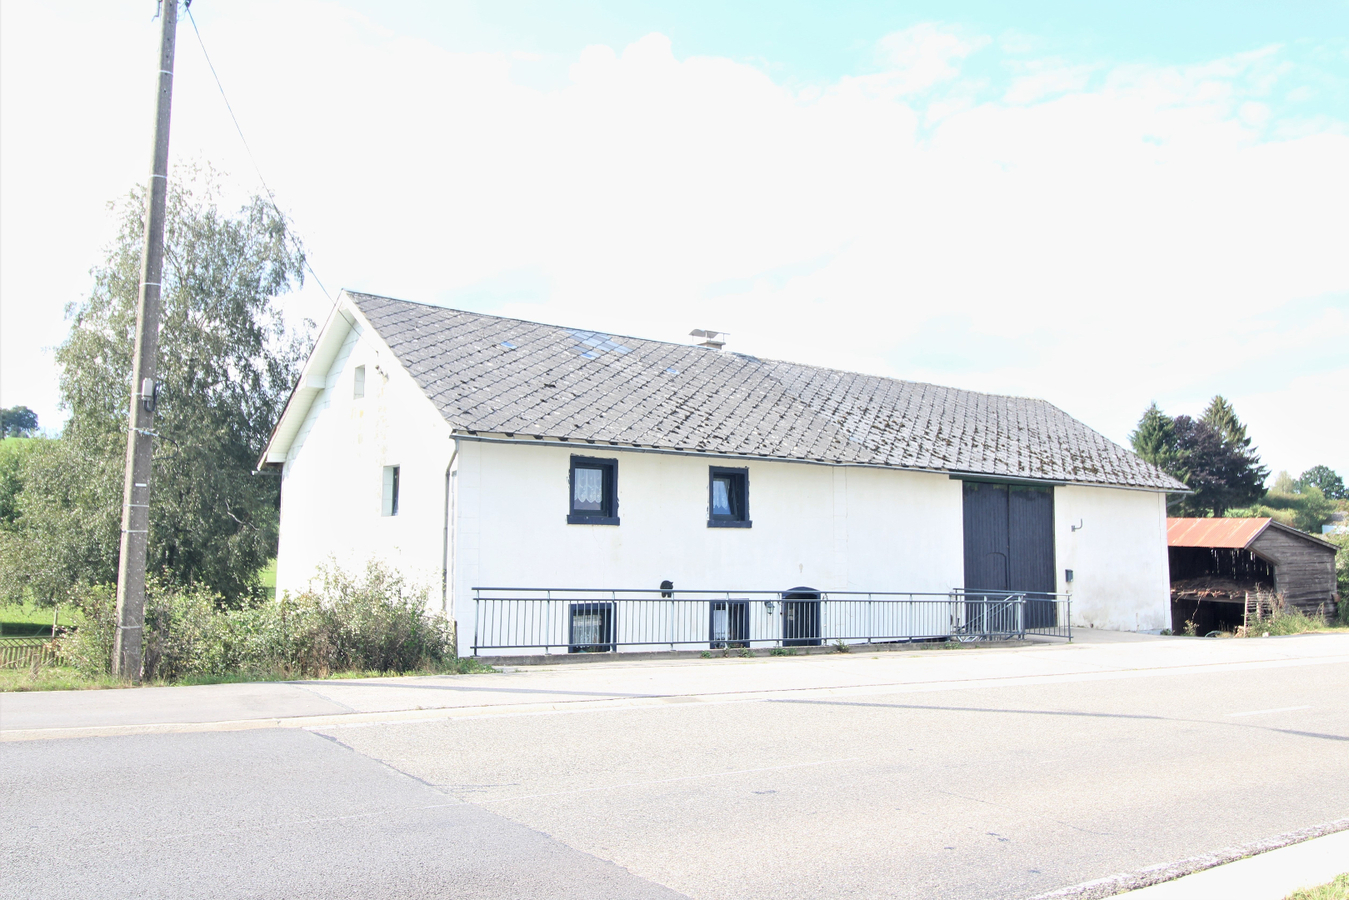 Property sold in Amel